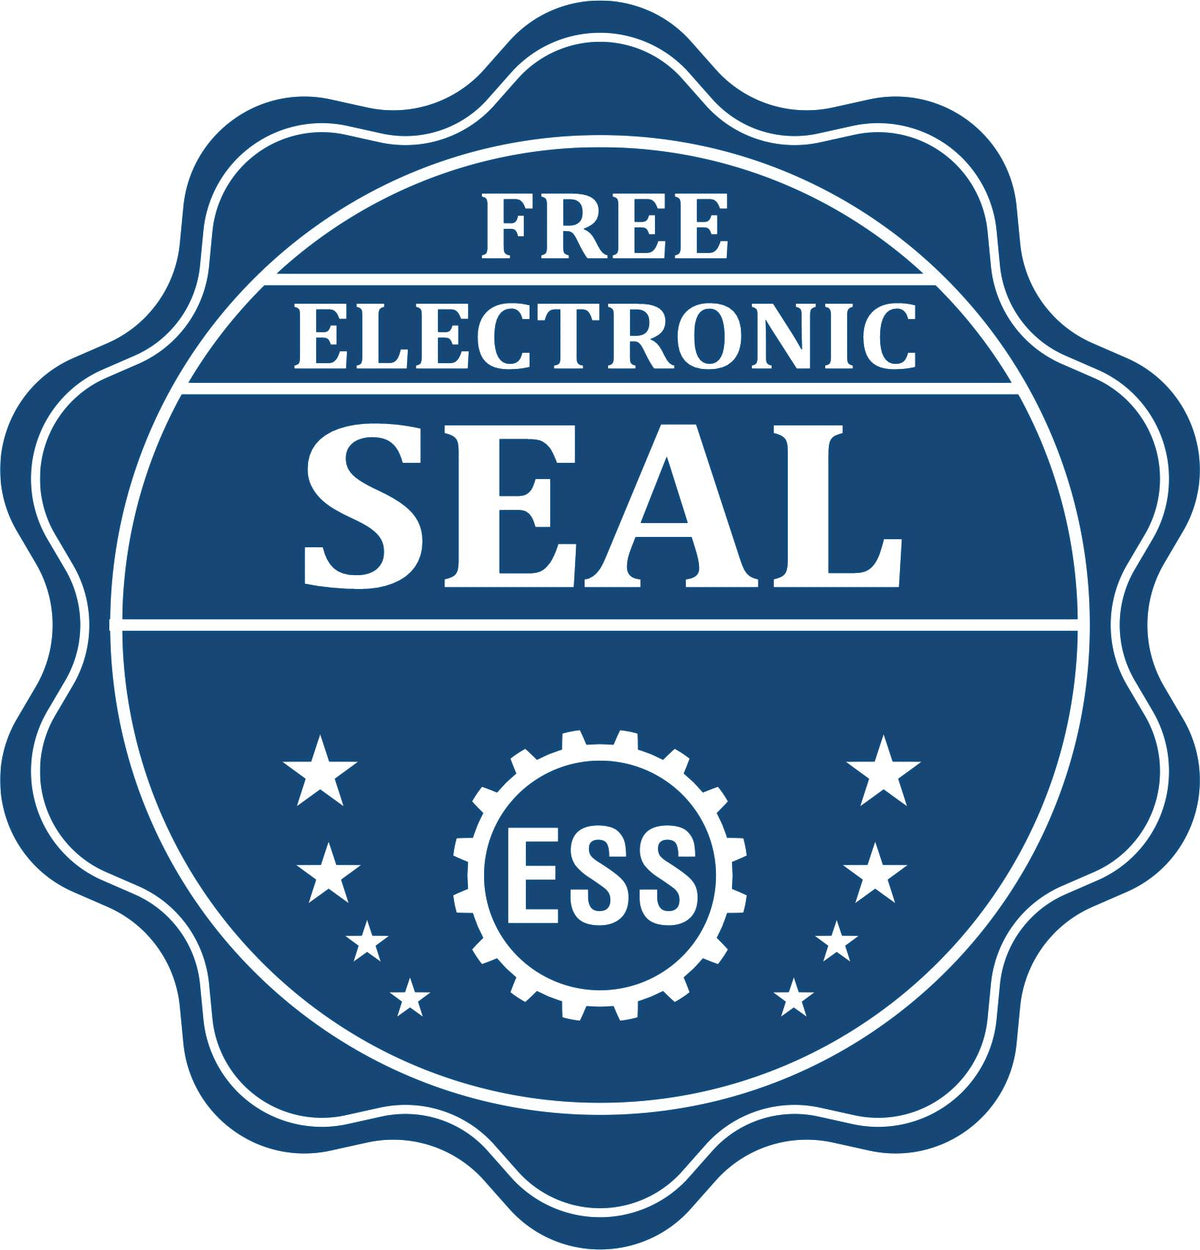 A badge showing a free electronic seal for the Hybrid Utah Land Surveyor Seal with stars and the ESS gear on the emblem.